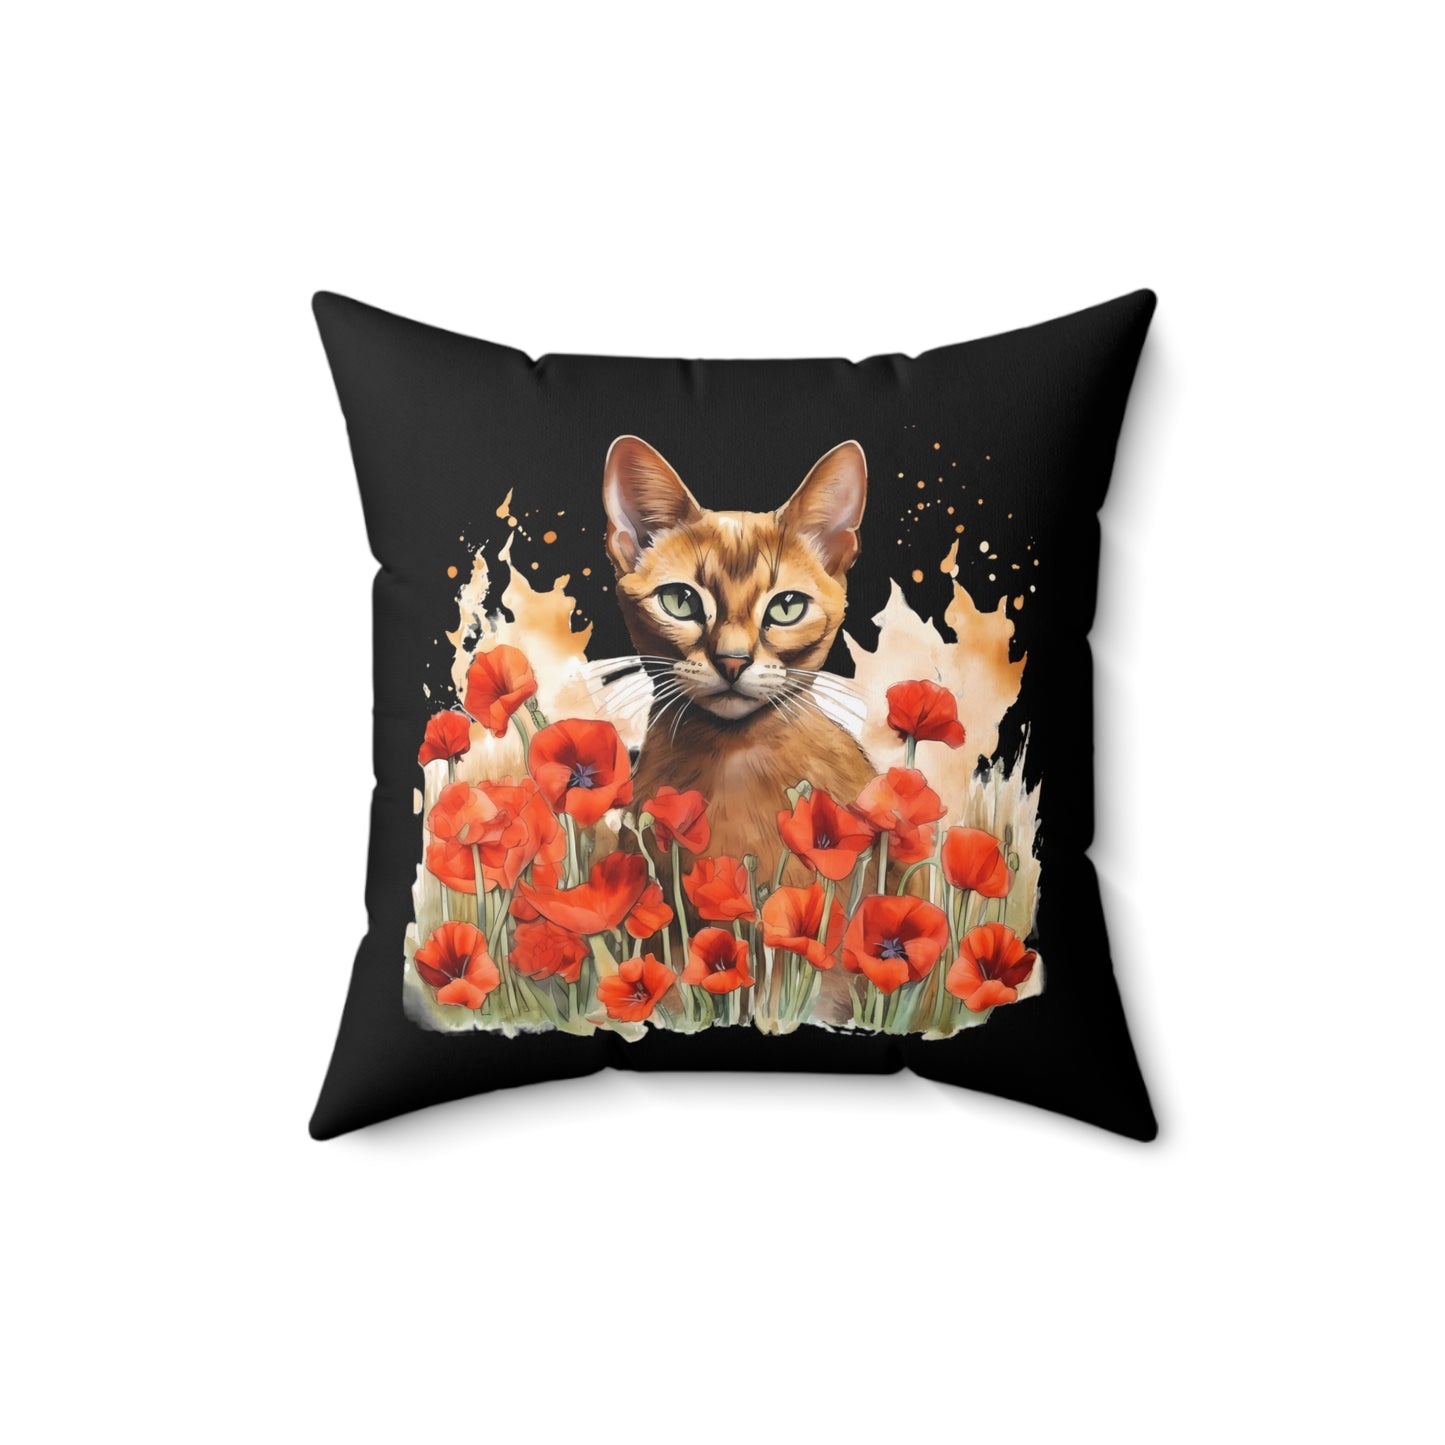 Tabby Cat Square Throw Pillow